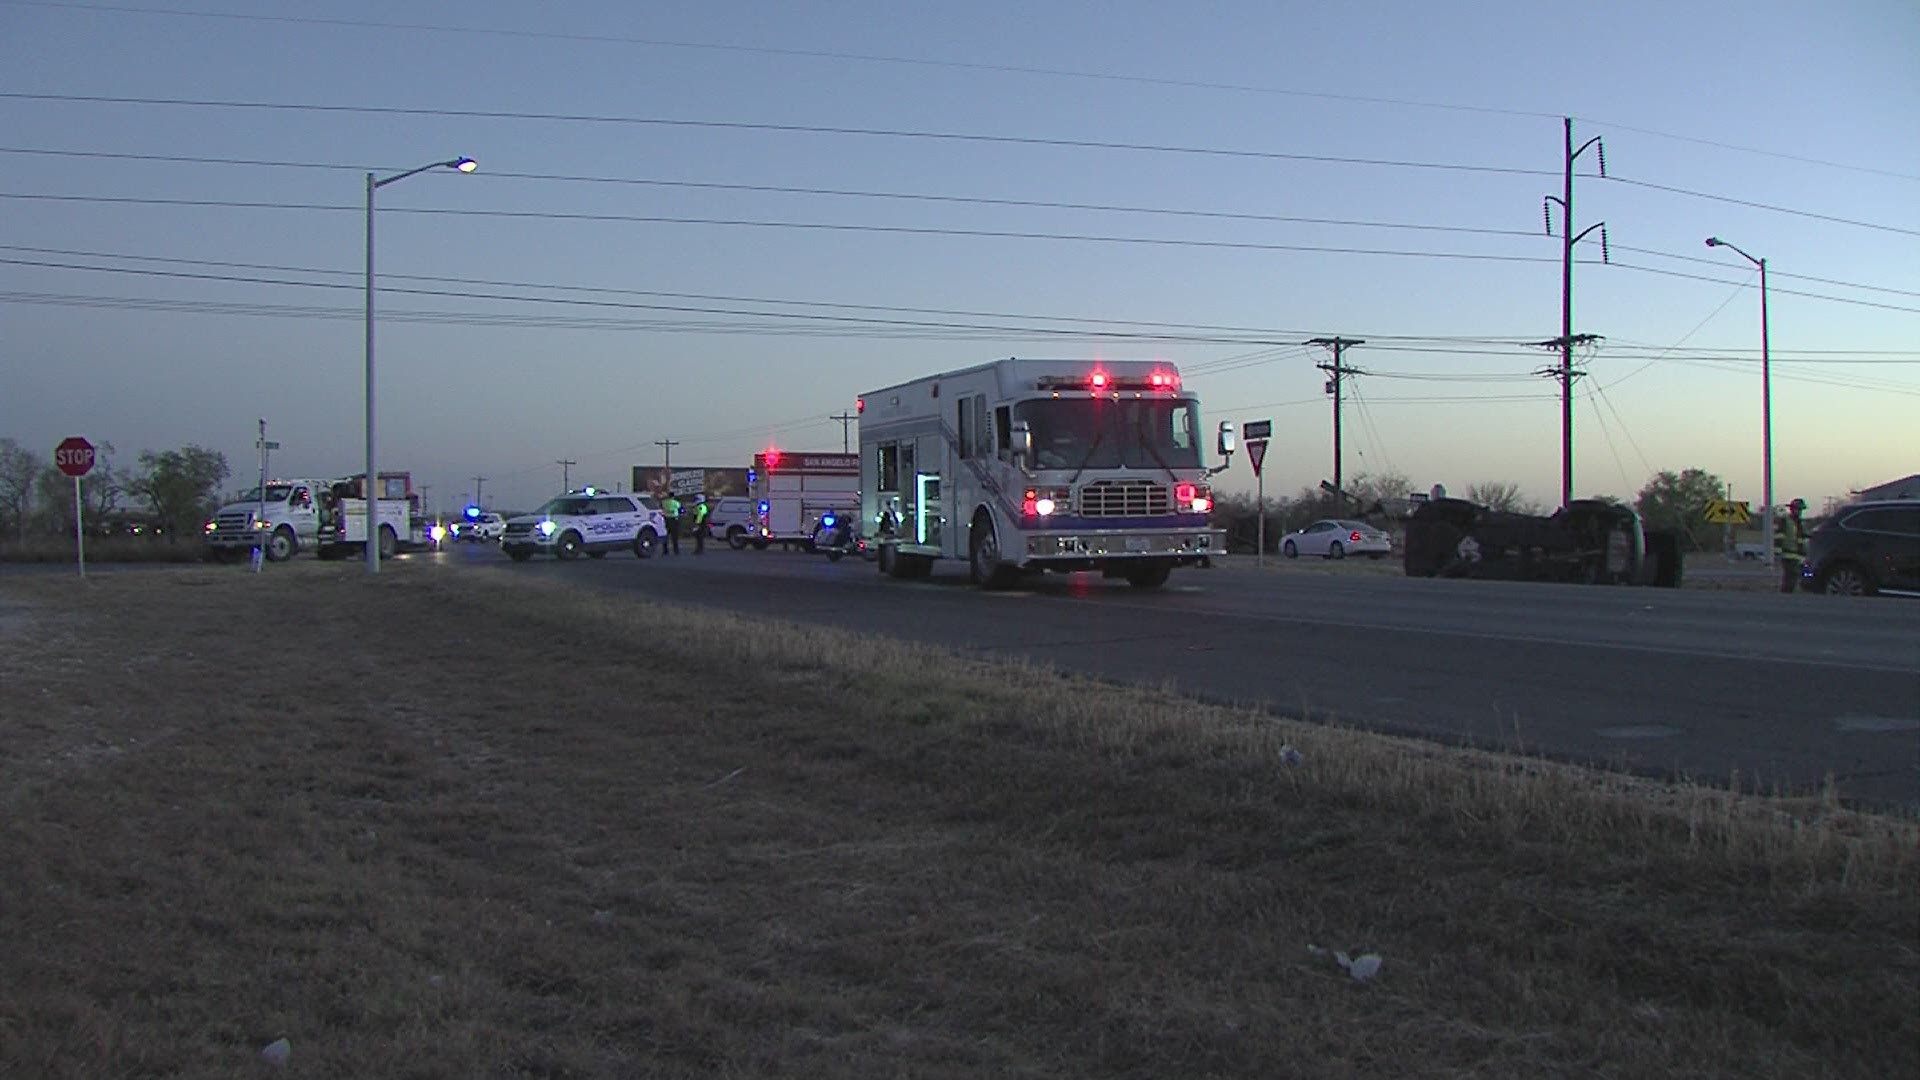 SAPD said no citations were issued at the time of the crash.